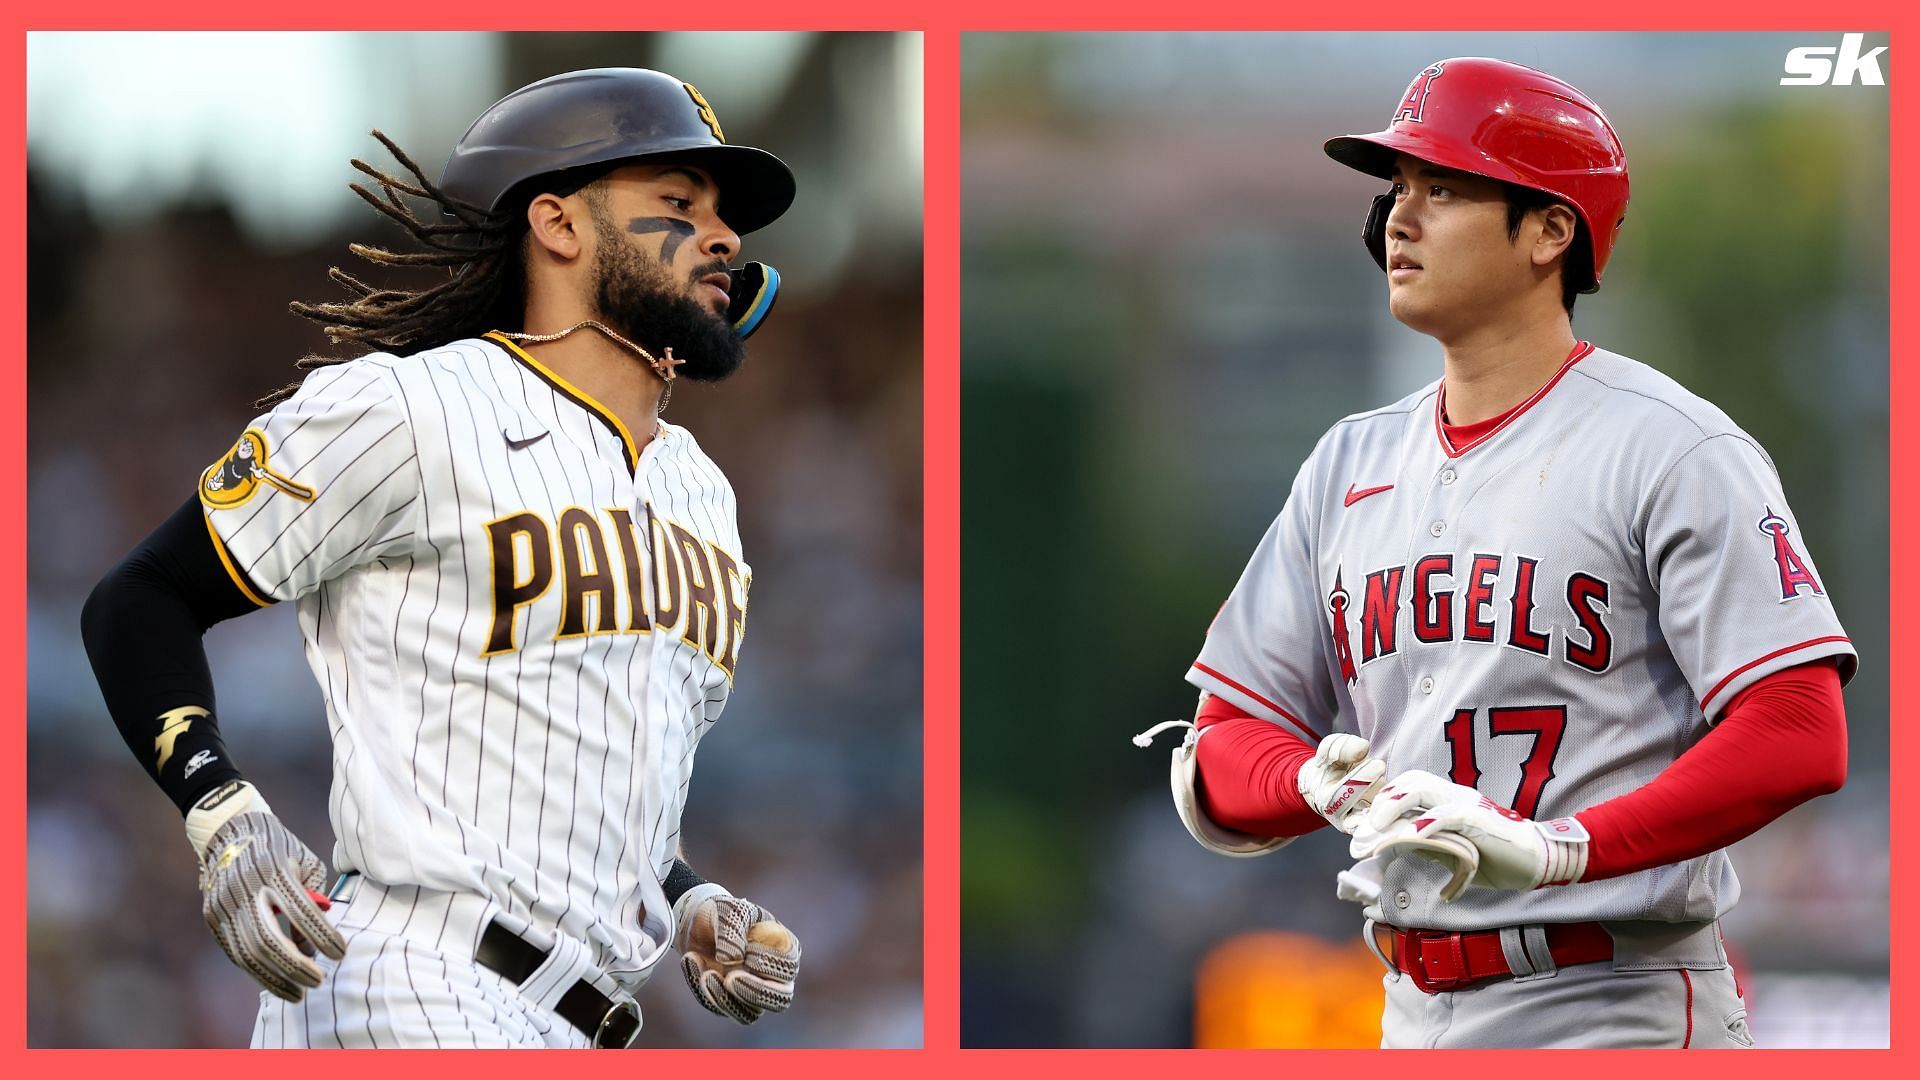 Fernando Tatis Jr. of the San Diego Padres and Shohei Ohtani of the Los Angeles Angels